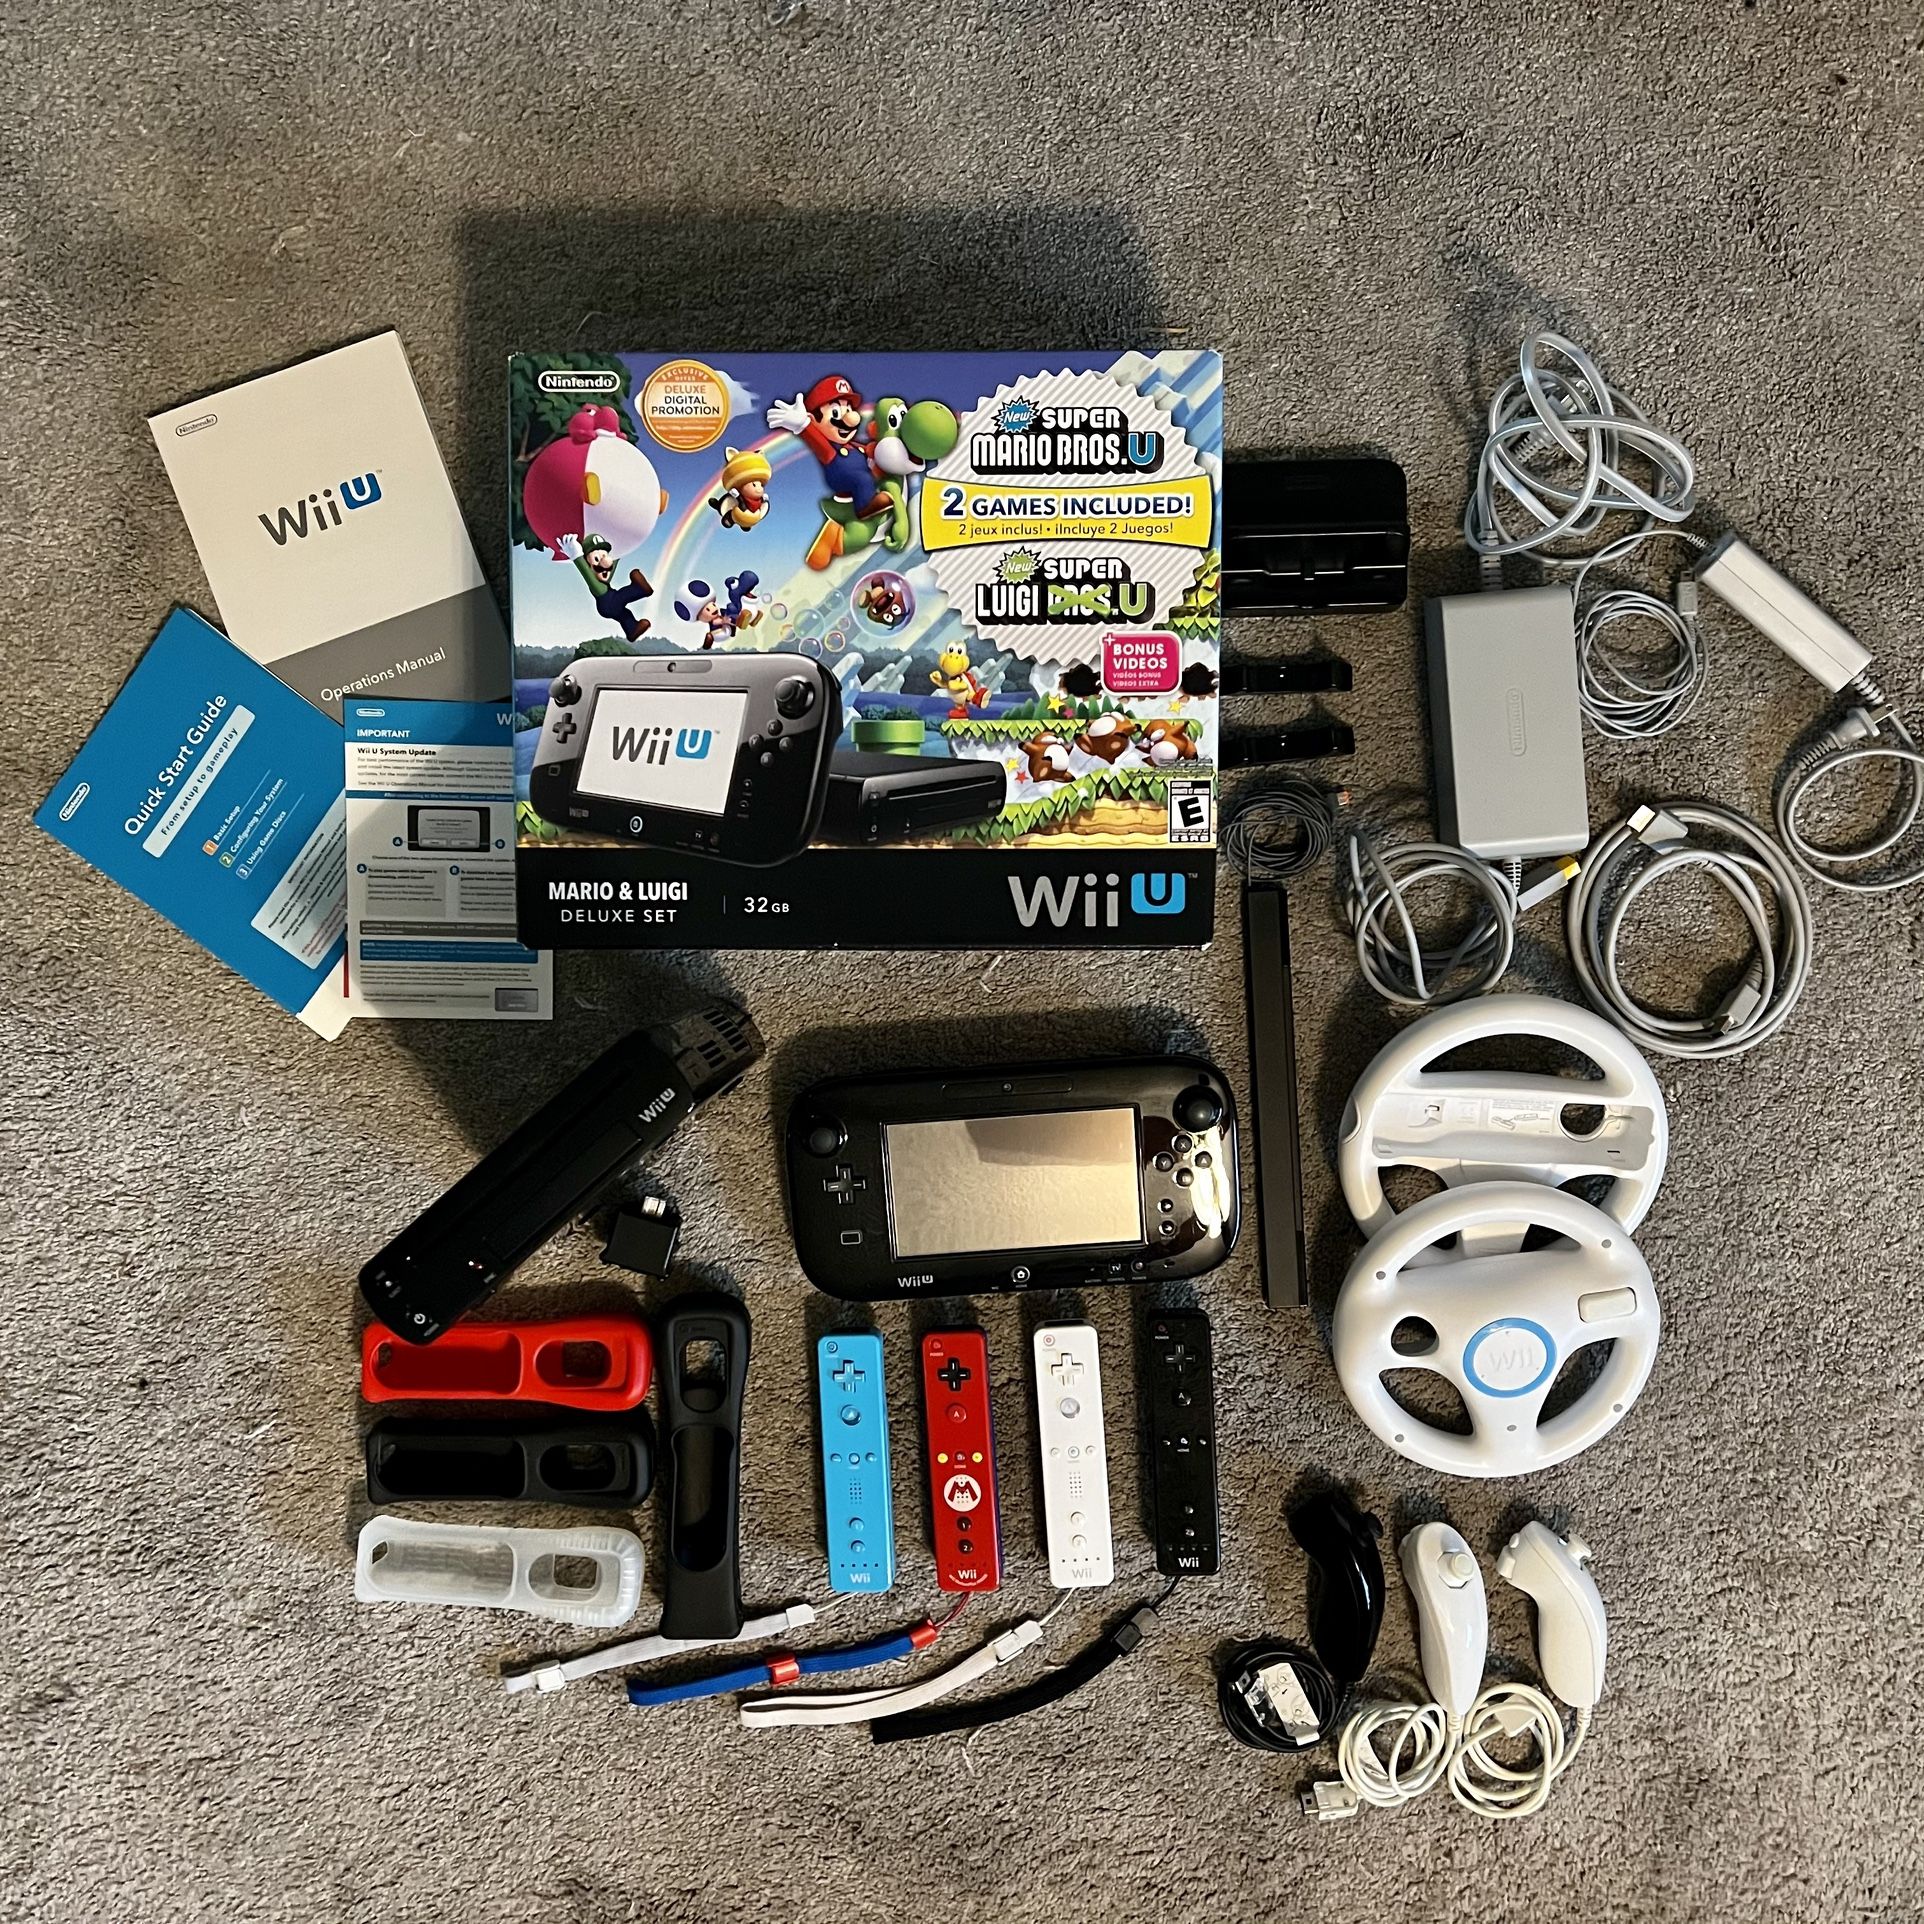 Nintendo Wii U Used With Box, GamePad, Stylus & 9 Games With Cases & Lots Of Accessories 